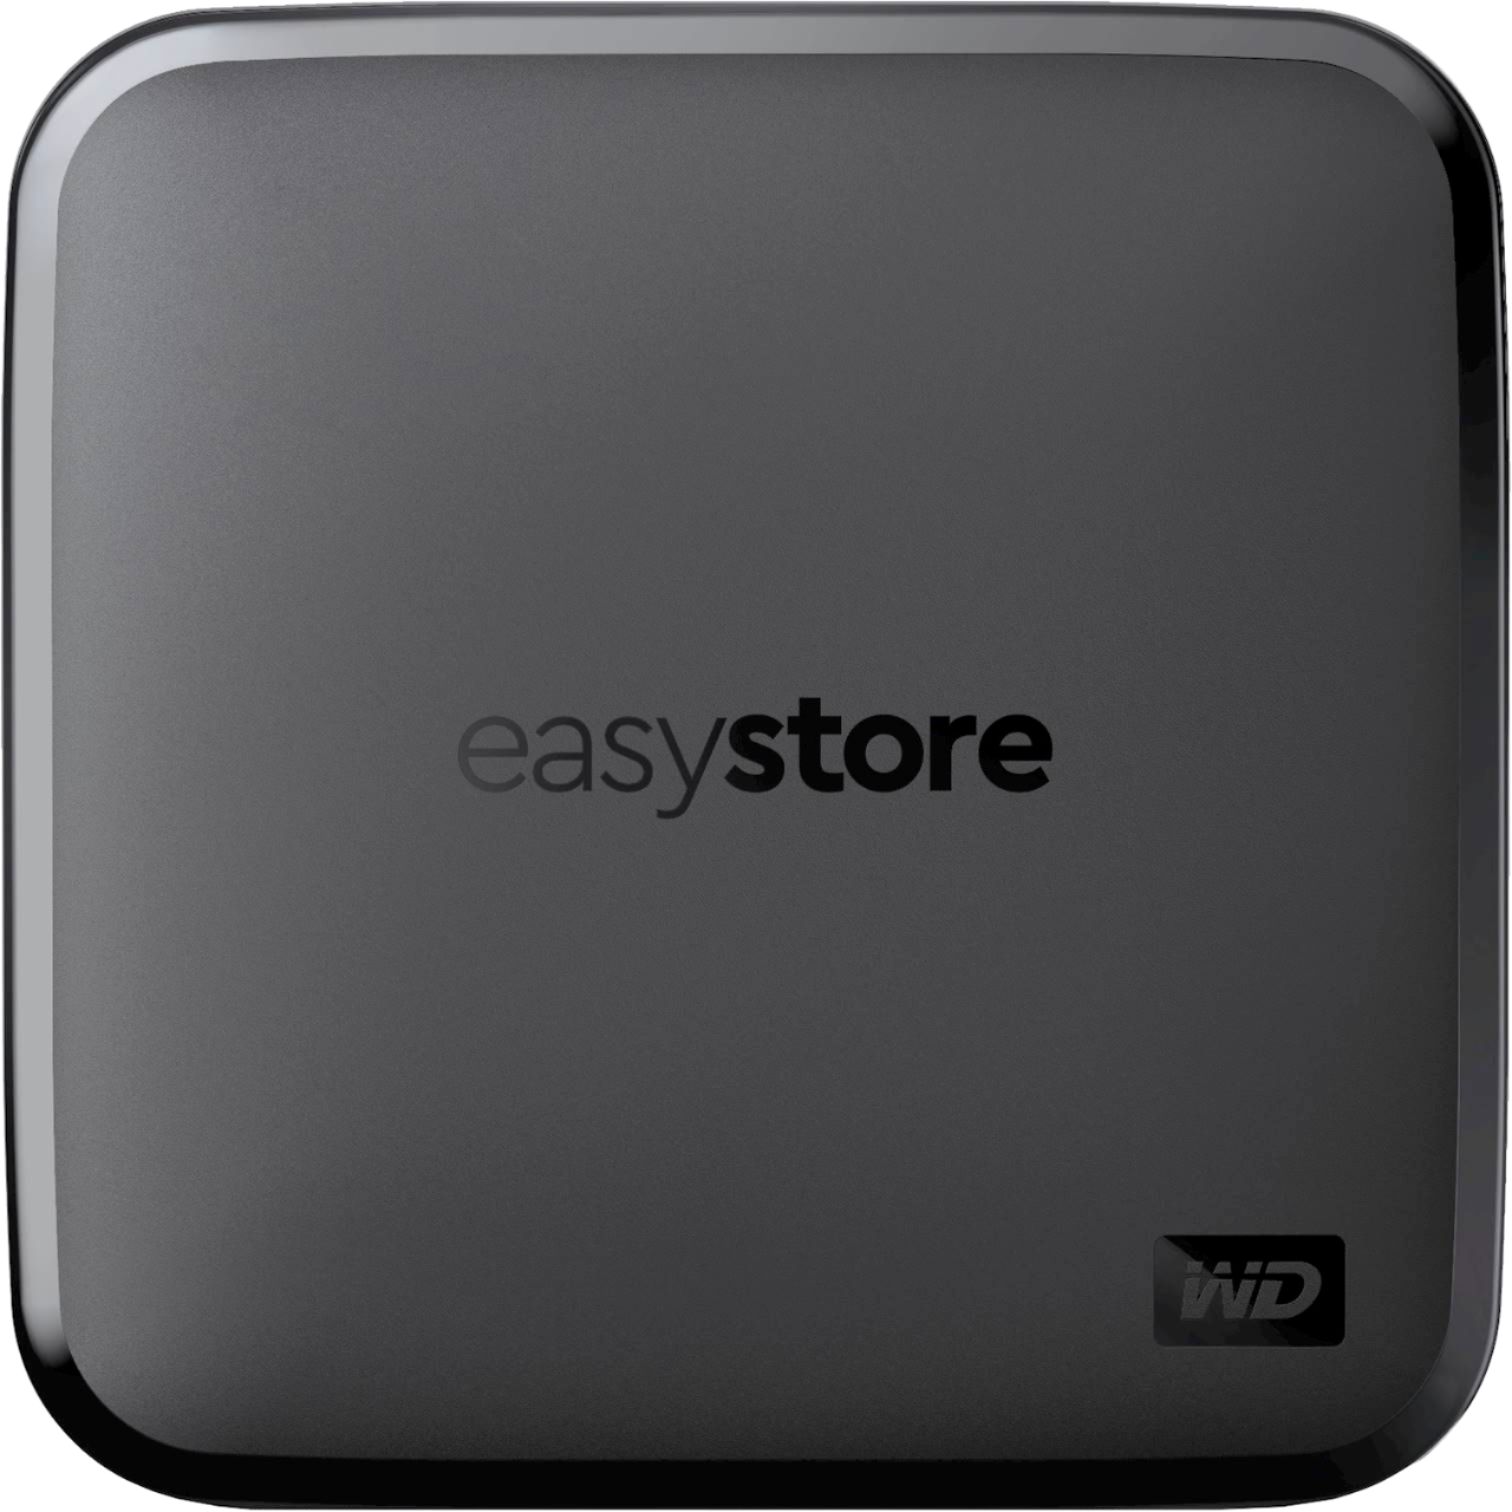 WD – easystore 1TB External USB 3.0 Portable SSD – Just $89.99 at Best Buy